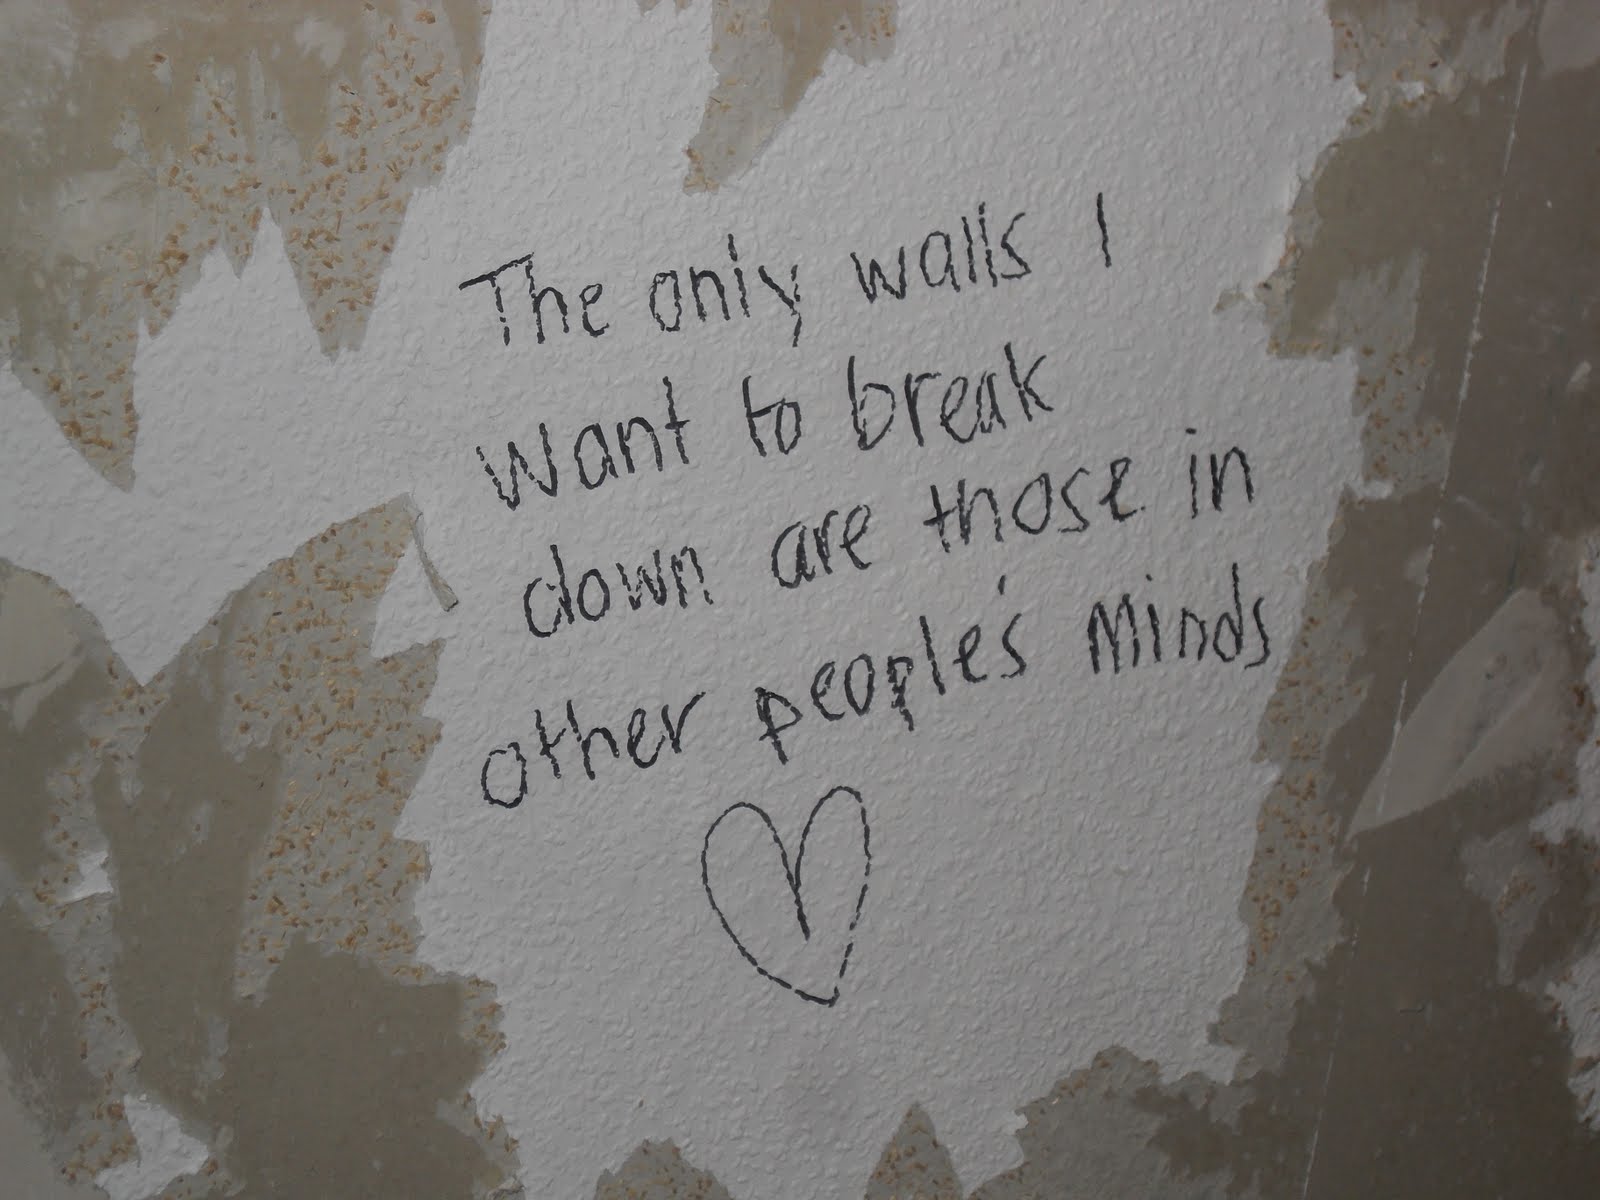 to write stuff on the wall paper since its being torn down